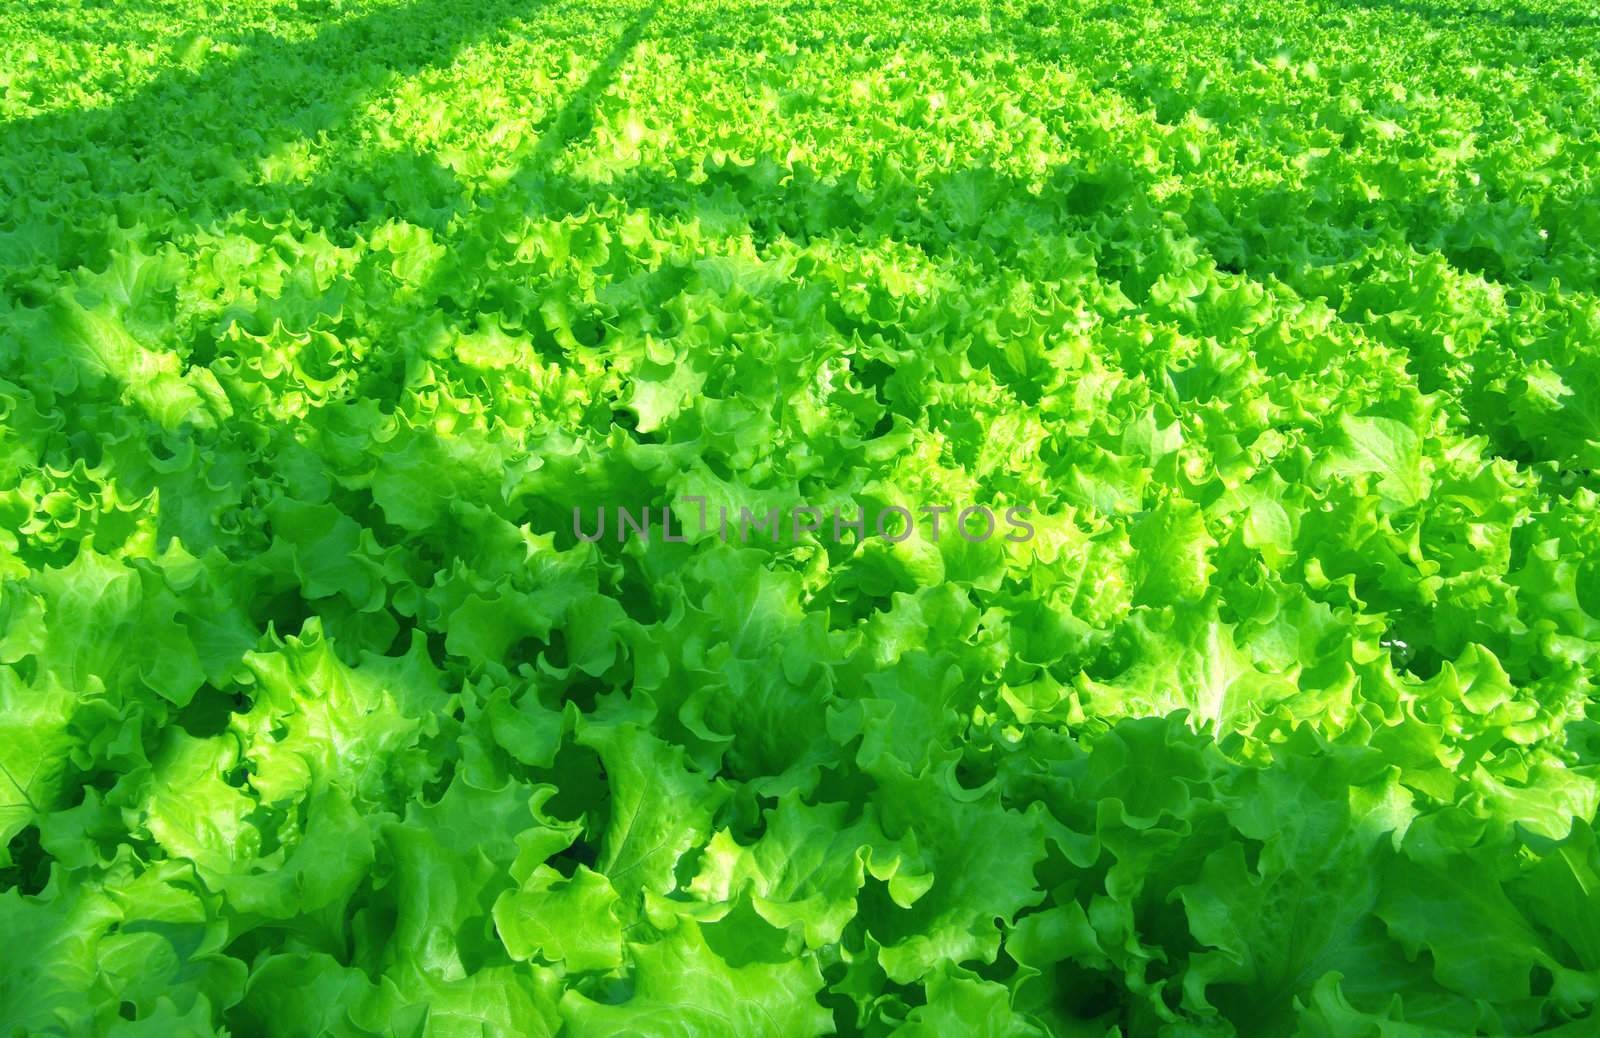 Salad - one of the very first spring vegetable cultures to our table